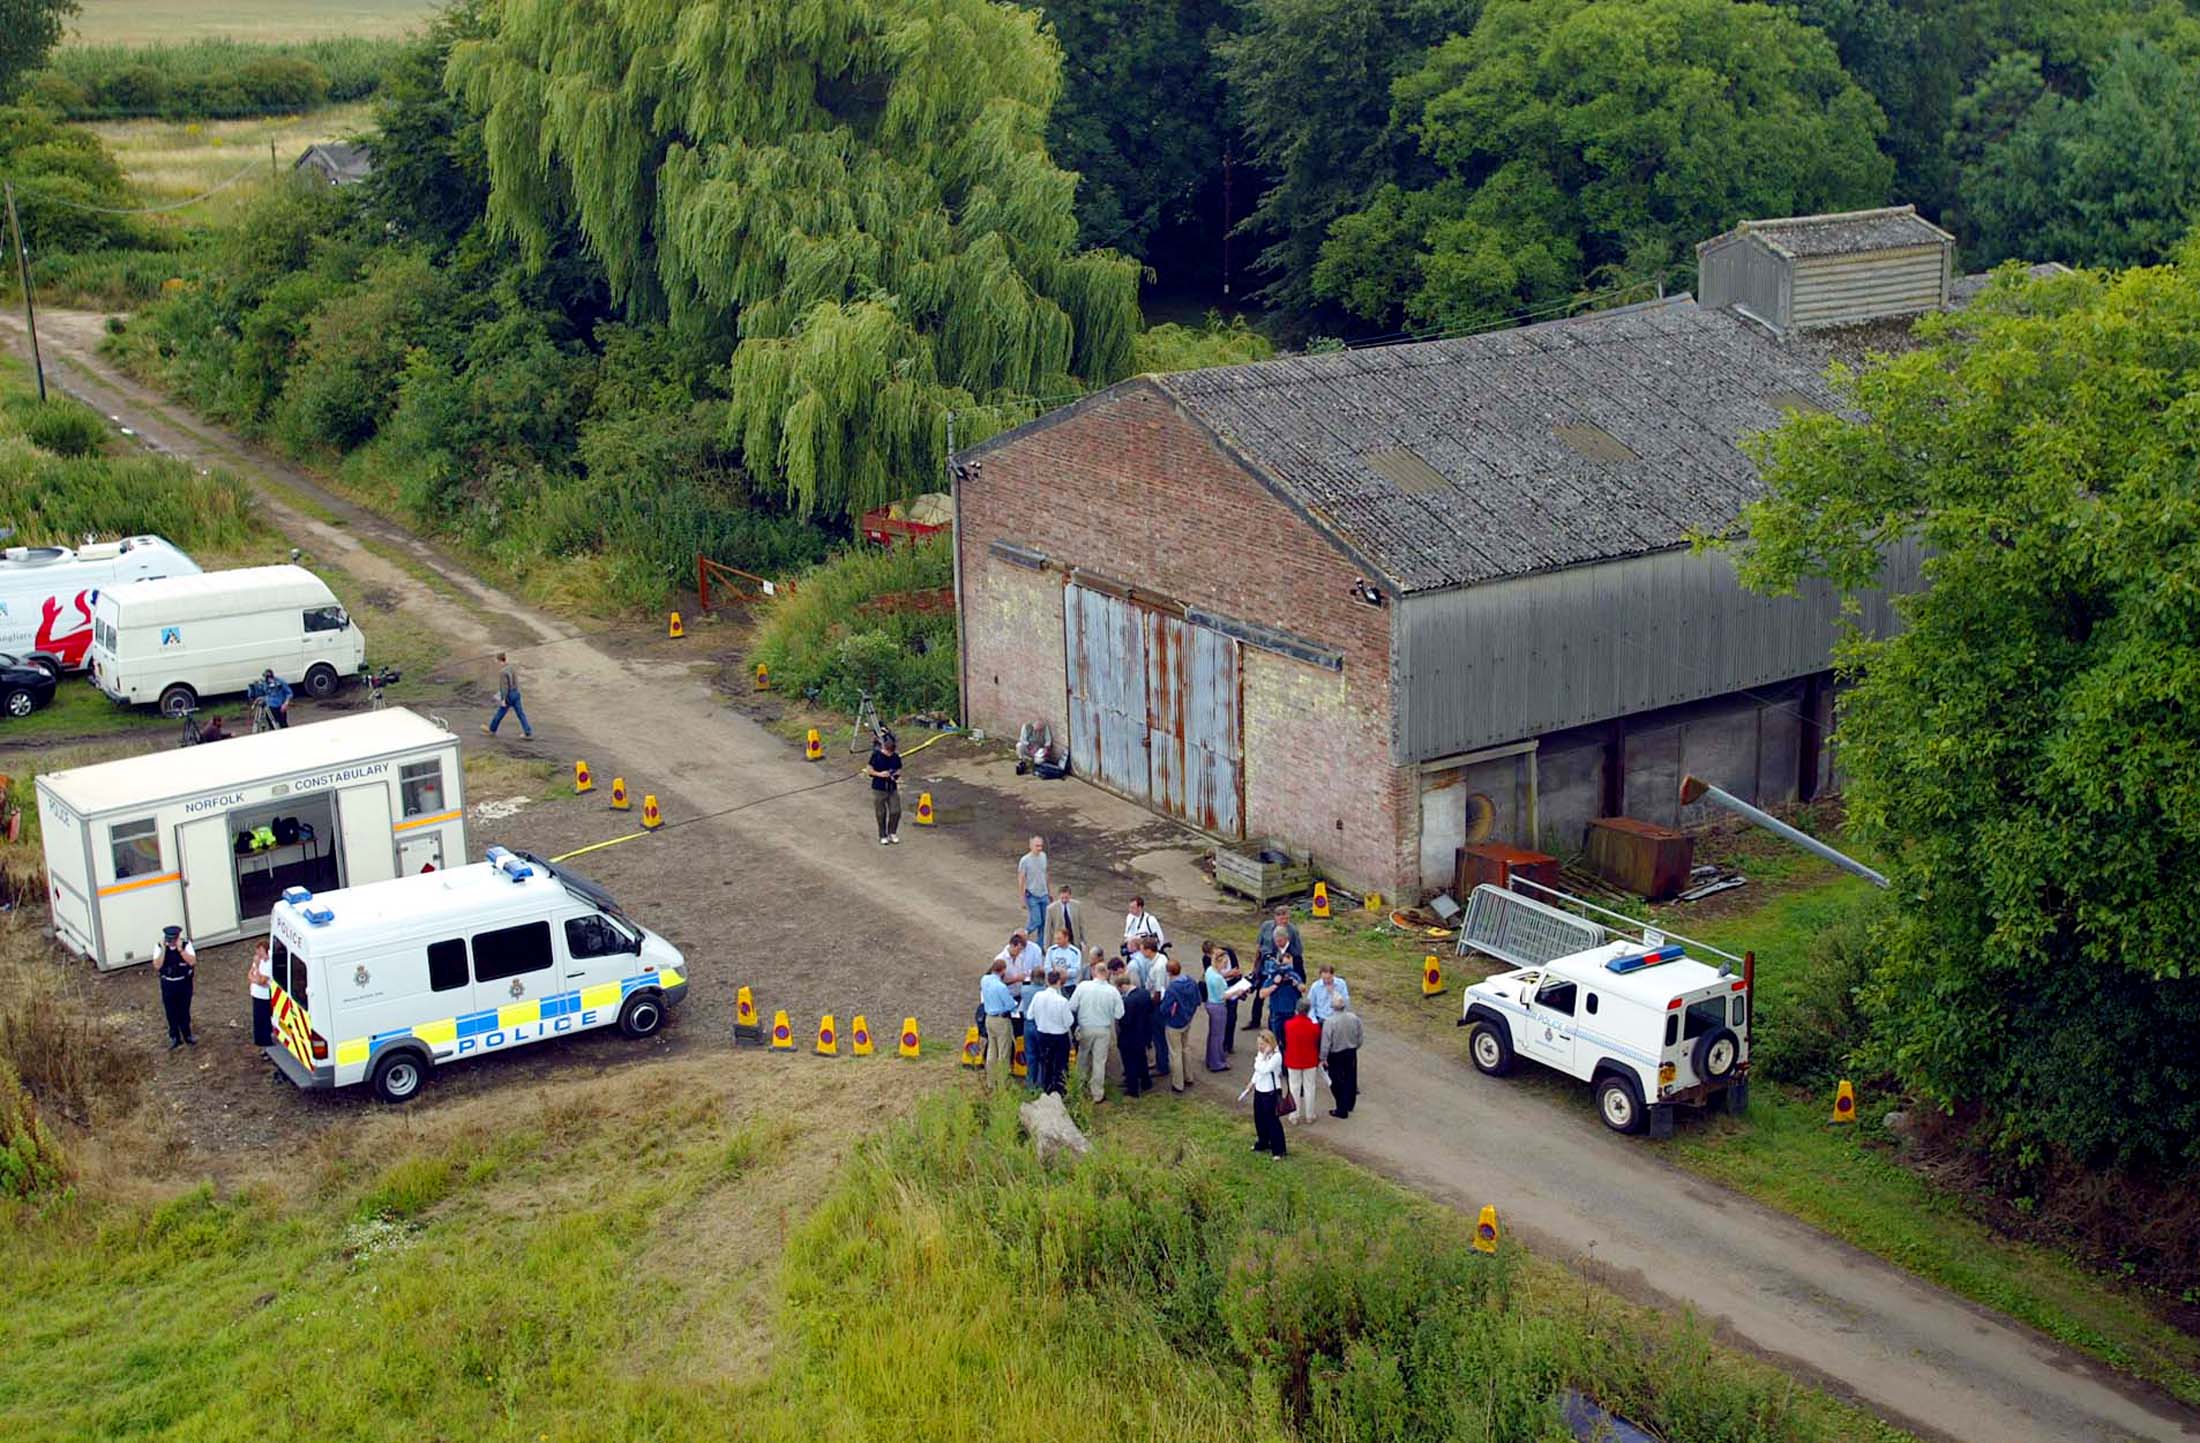 Aerial view shows police and members of the media gathering at the home of British farmer Tony Martin, "Bleak House", after his release from custody, in Norfolk, eastern England, July 28, 2003.